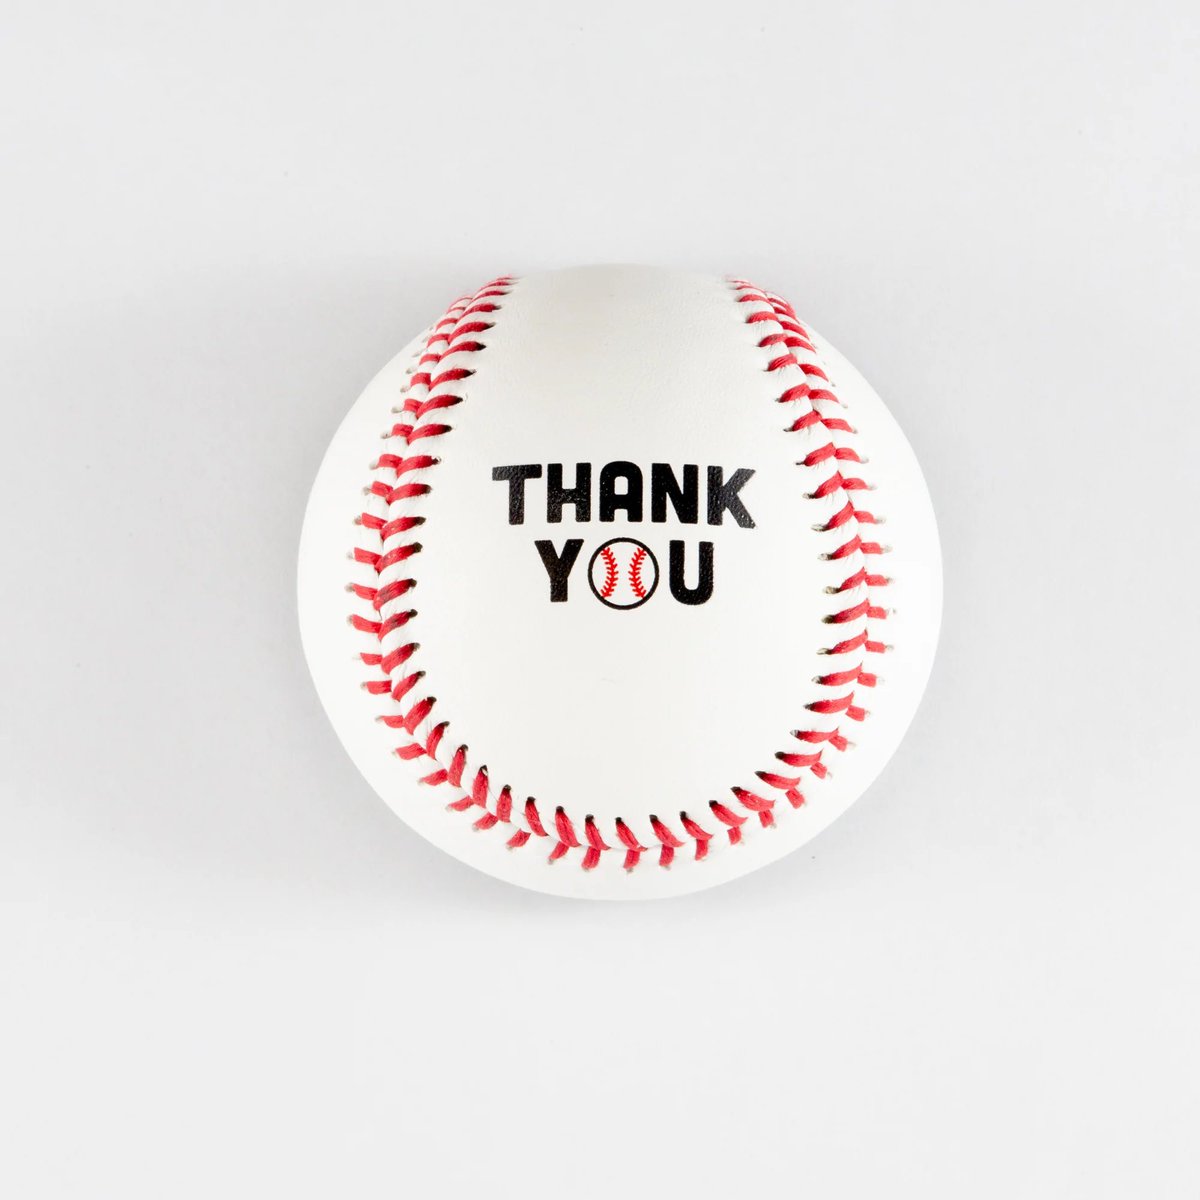 Couldn’t let national coaches week go by without saying thanks to all the coaches that make our program a success. We are lucky to have you and appreciate all you do #thankscoach ⚾️❤️